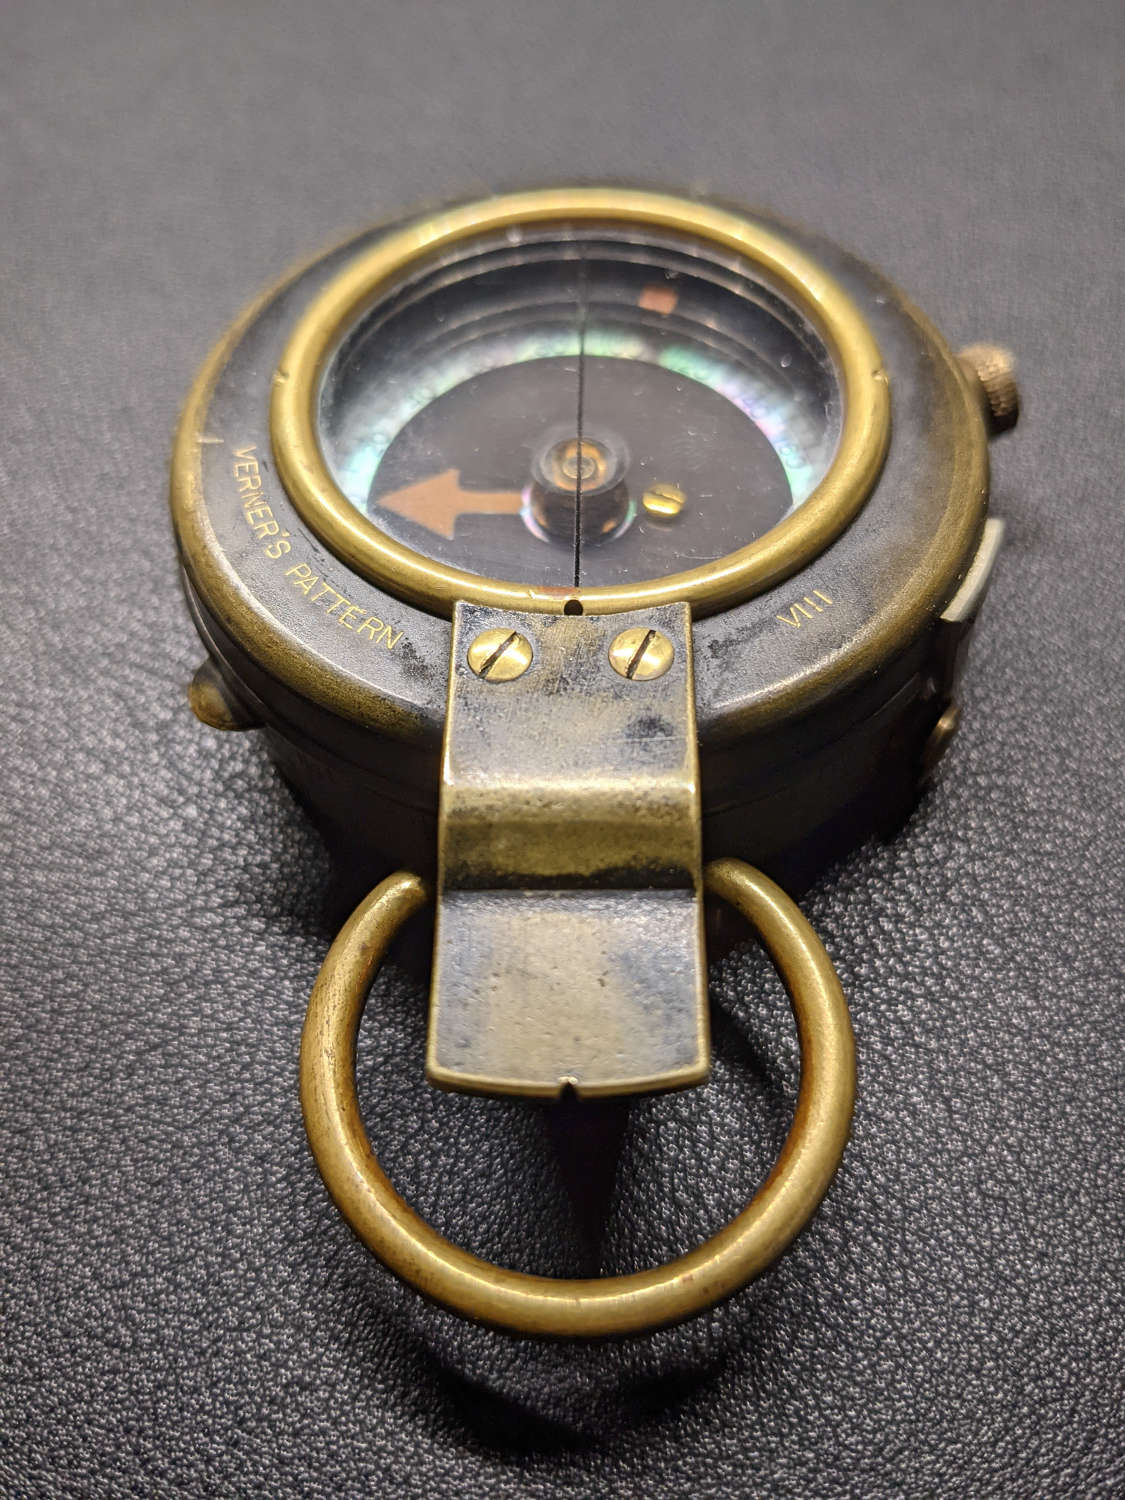 WWI British Officers Verner’s Pattern VIII Compass dated 1917